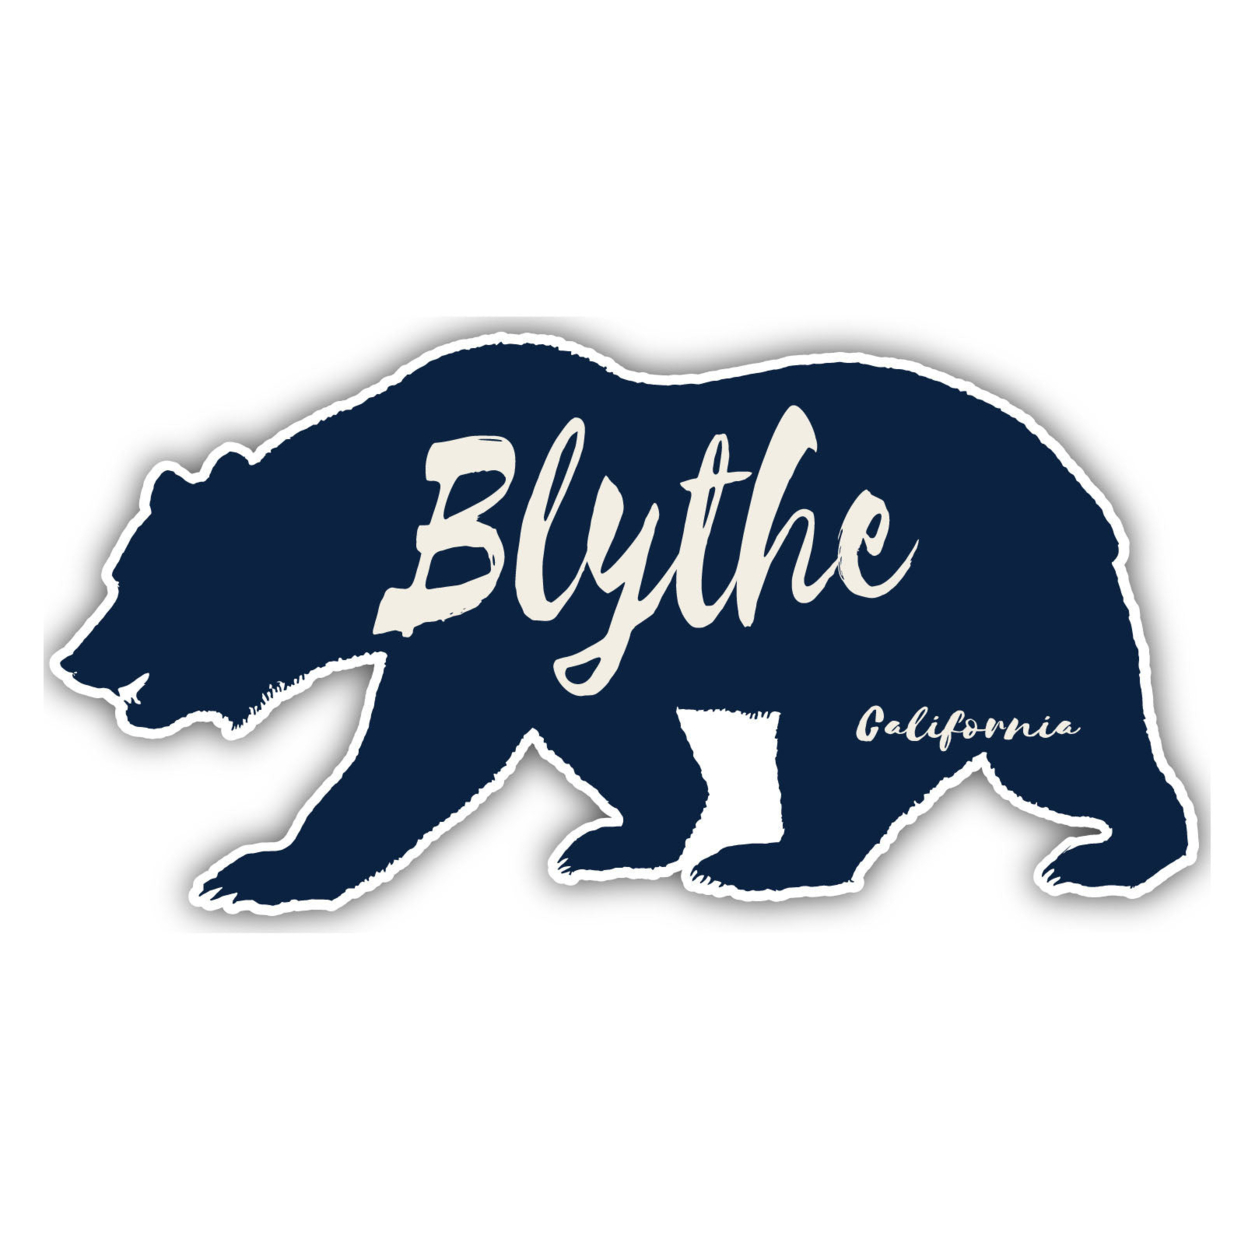 Blythe California Souvenir Decorative Stickers (Choose Theme And Size) - 4-Pack, 2-Inch, Great Outdoors